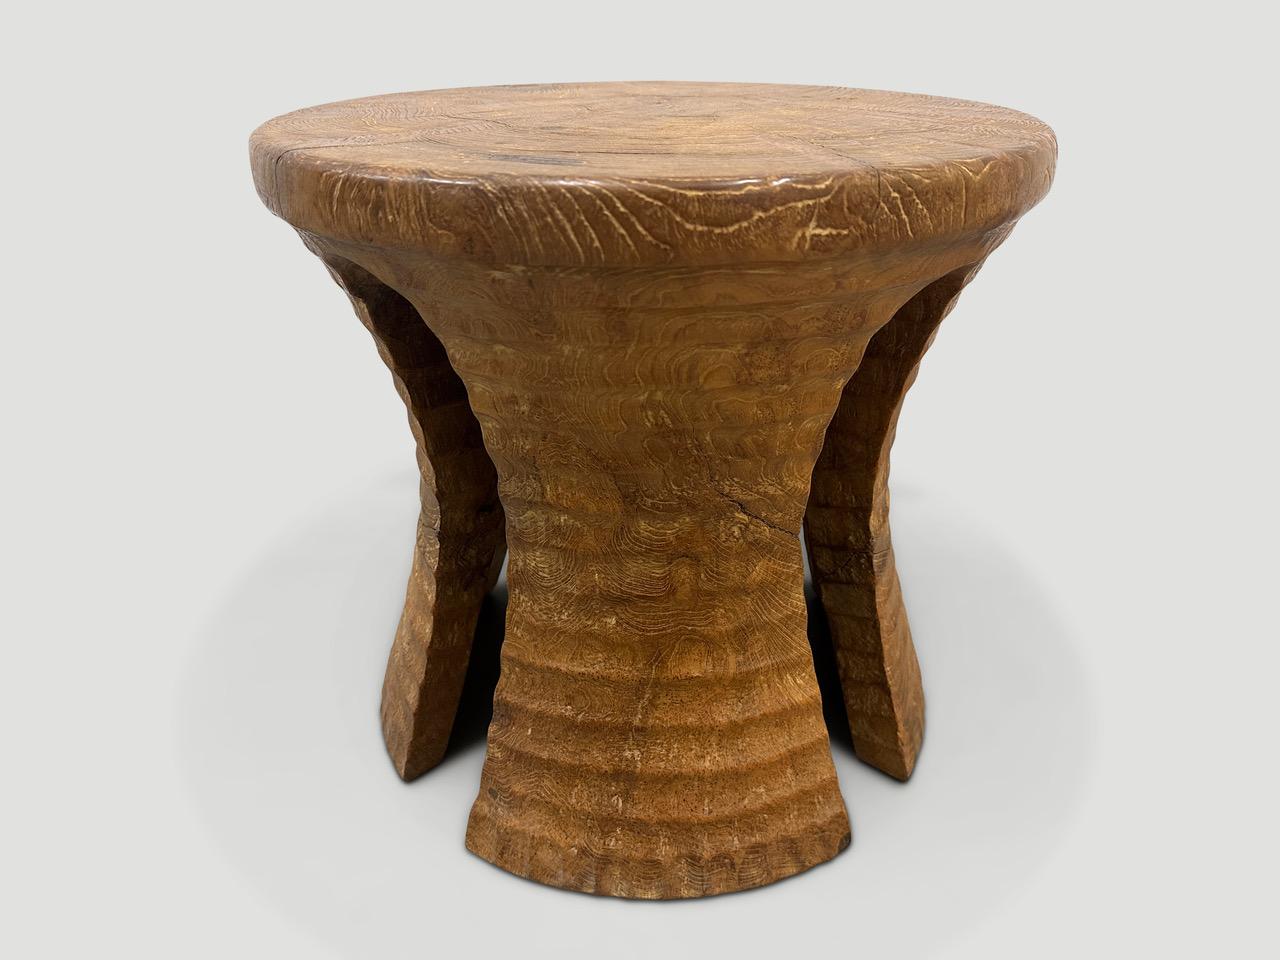 Andrianna Shamaris Sculptural Teak Wood Side Table or Stool In Excellent Condition For Sale In New York, NY